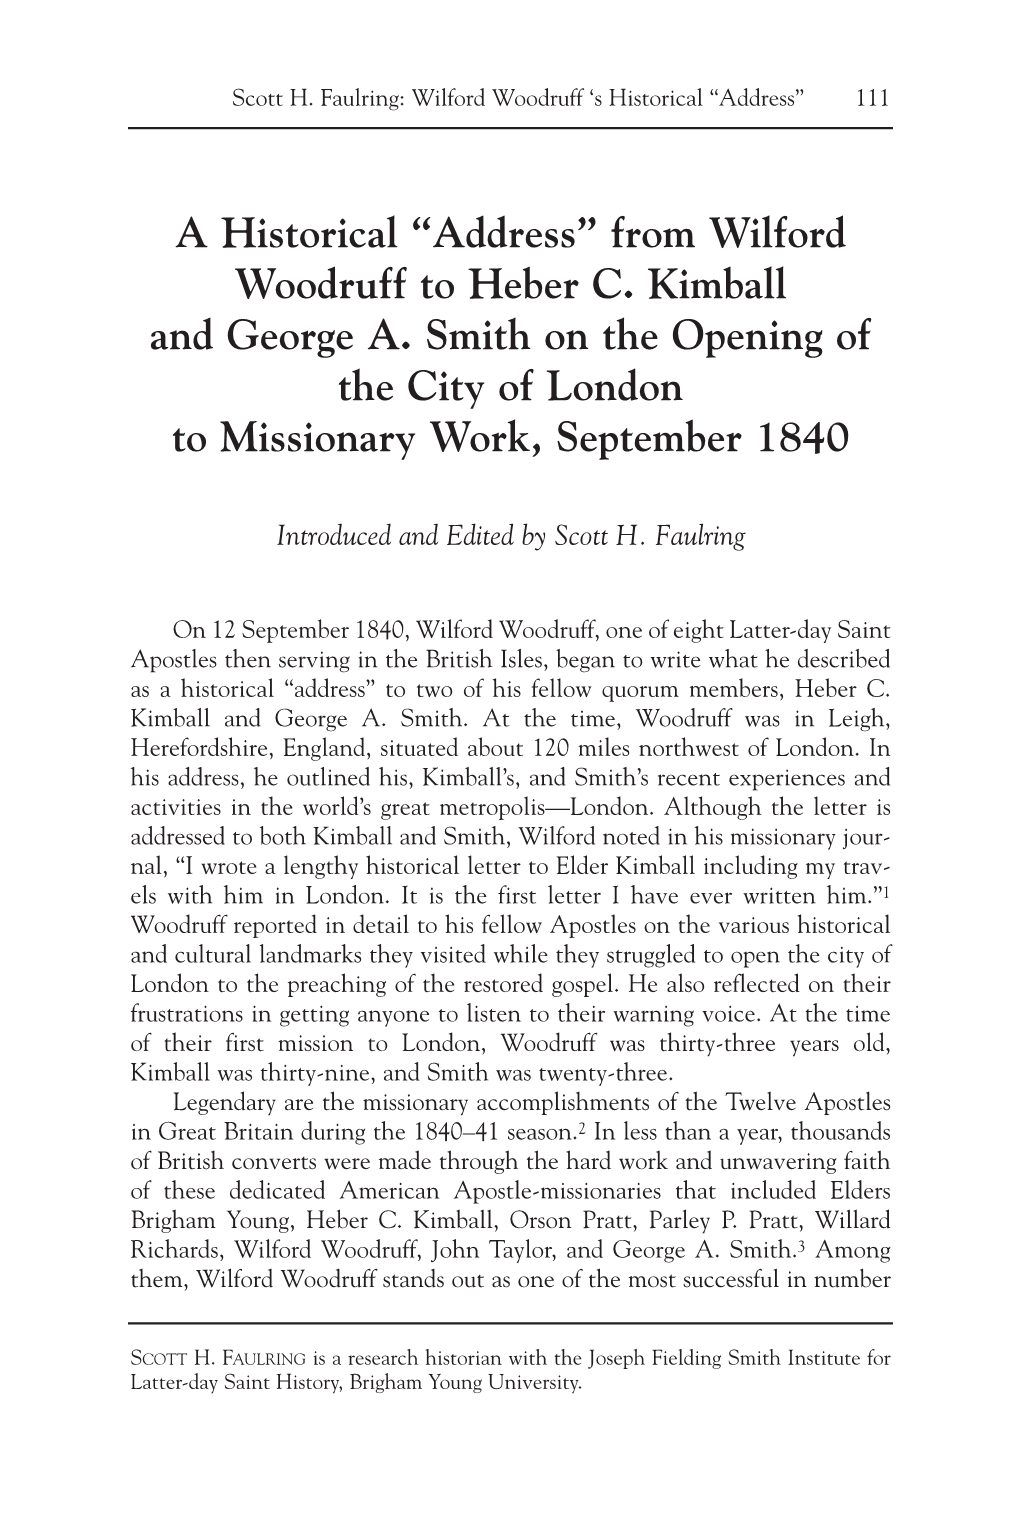 From Wilford Woodruff to Heber C. Kimball and George A. Smith on the Opening of the City of London to Missionary Work, September 1840